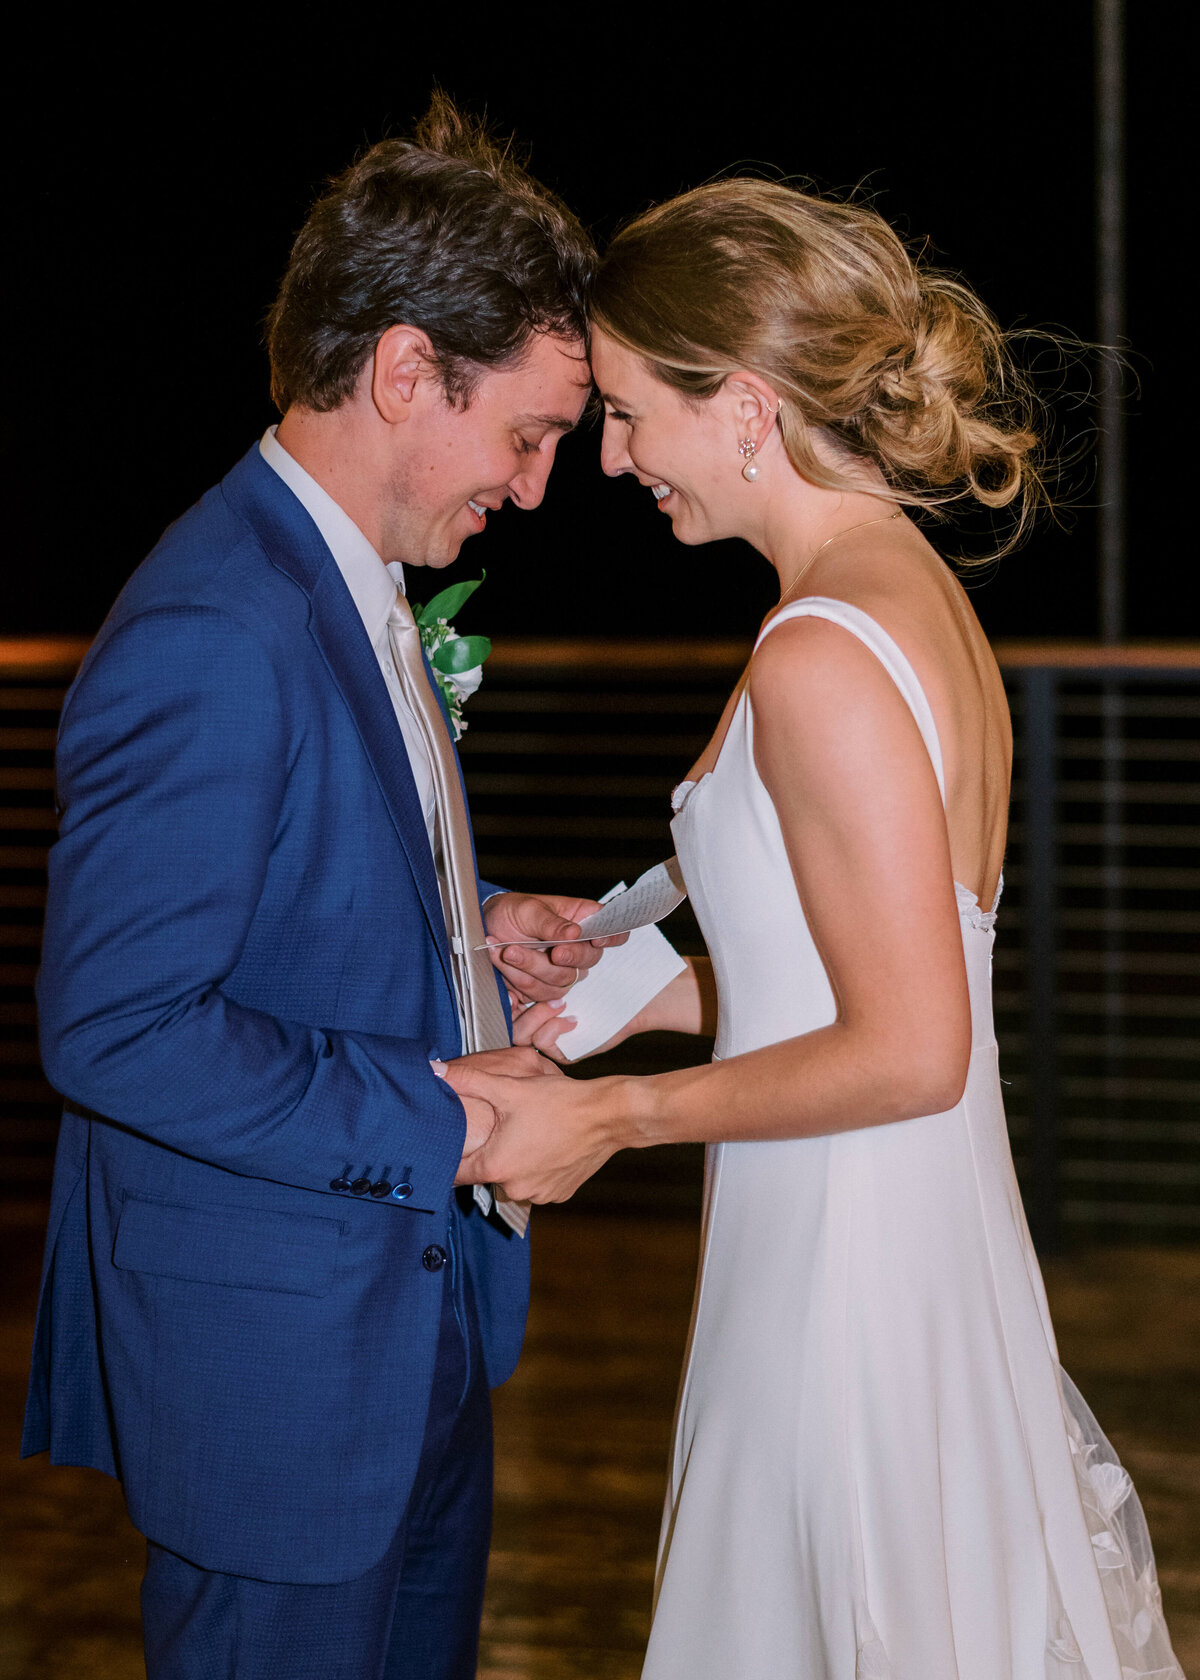 Newly married couple shares a private moment on the dance floor after their reception, image captured by Virginia wedding photographer Erin Winter